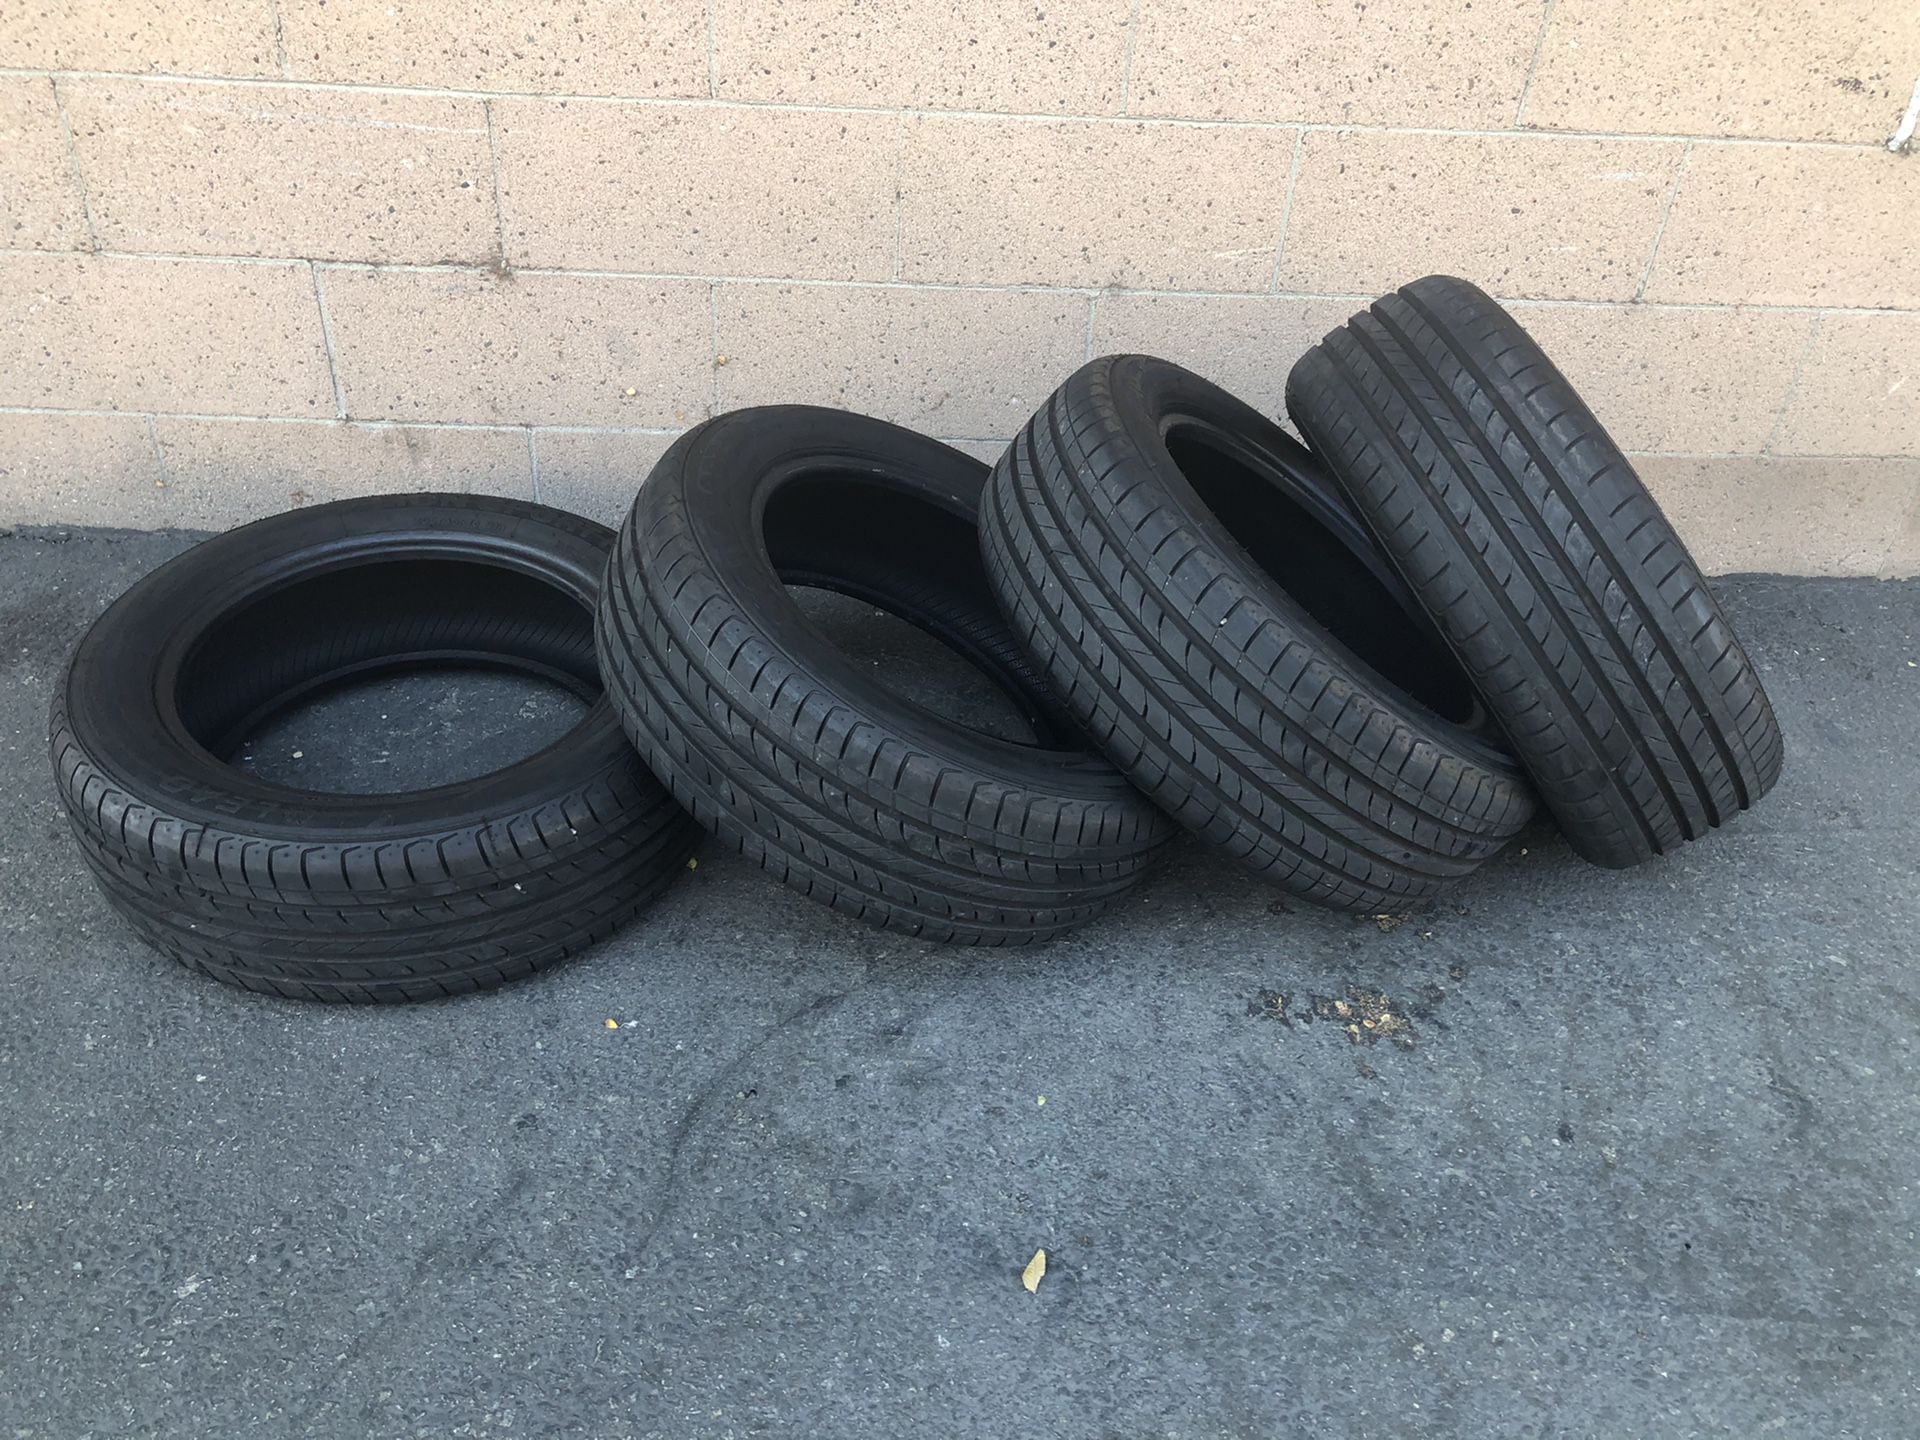 Tires 205 55 16 all same brand 99% threads barely new . Paid $399 for all 4 no longer need it for my trailer